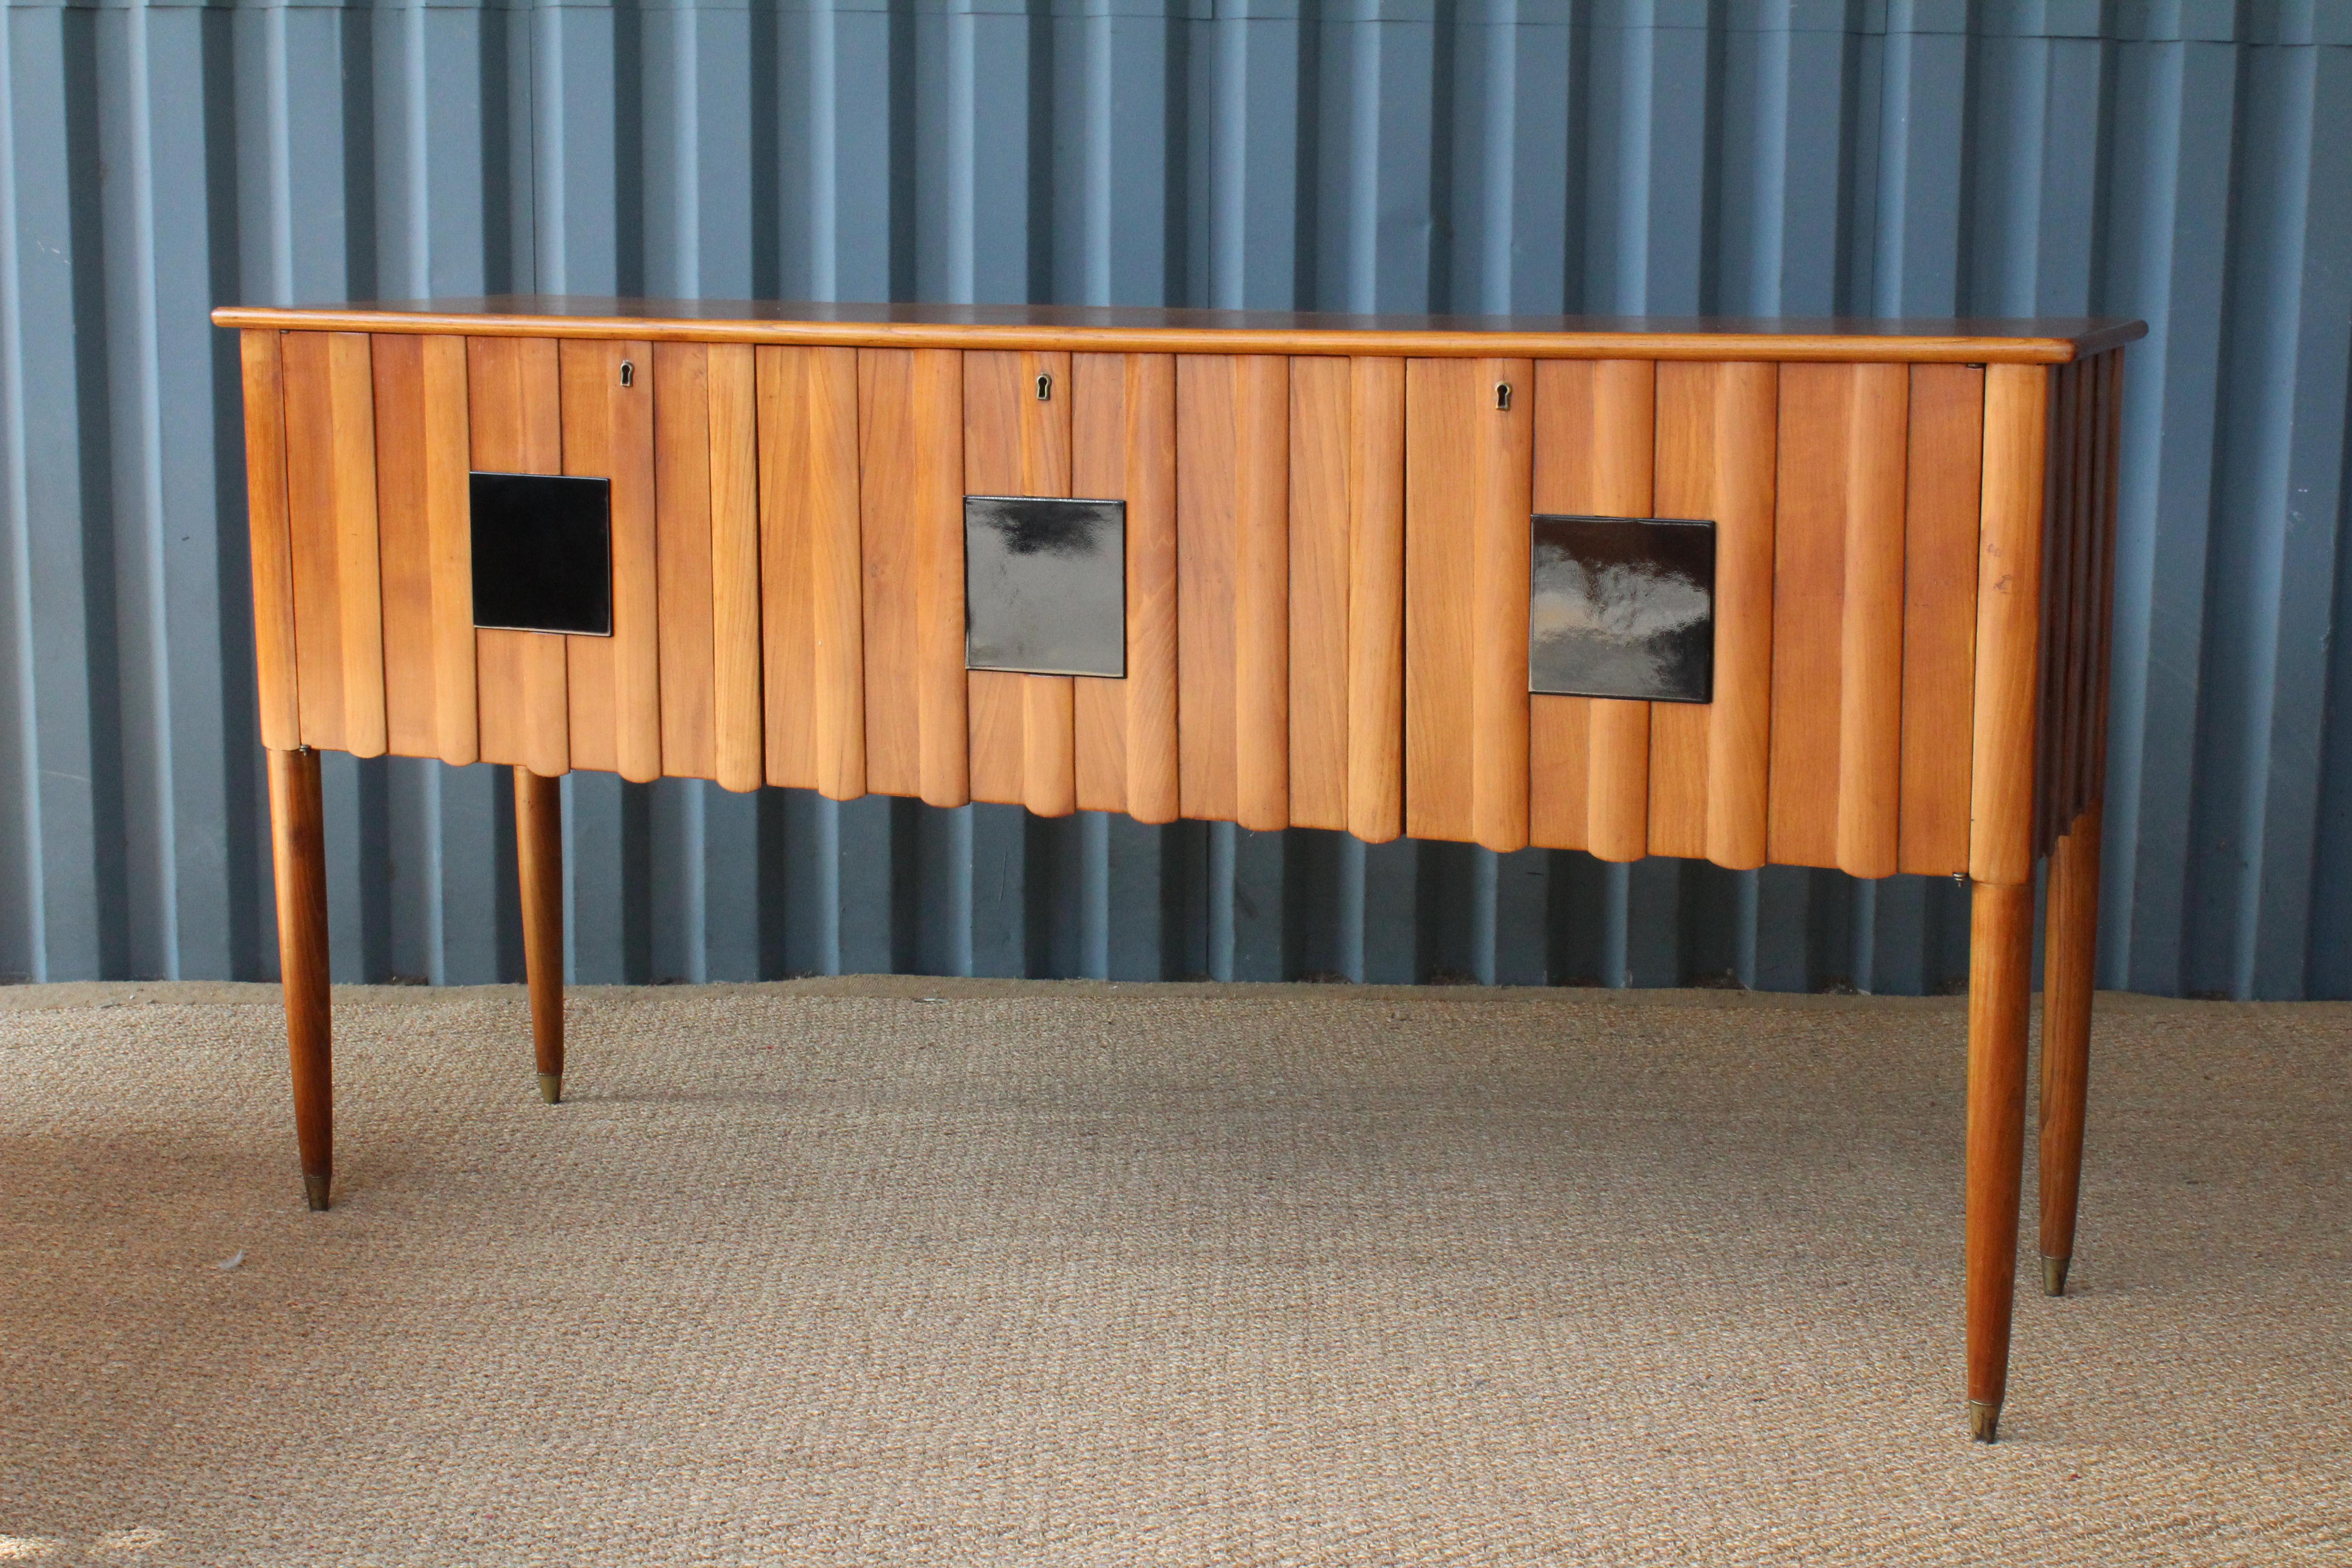 1950s Italian credenza with locking doors. This piece has a center compartment which was used to hold bar ware. This piece has the original red glass and mirrored tiles in the interior center compartment. Black lacquered wood tiles on the front of